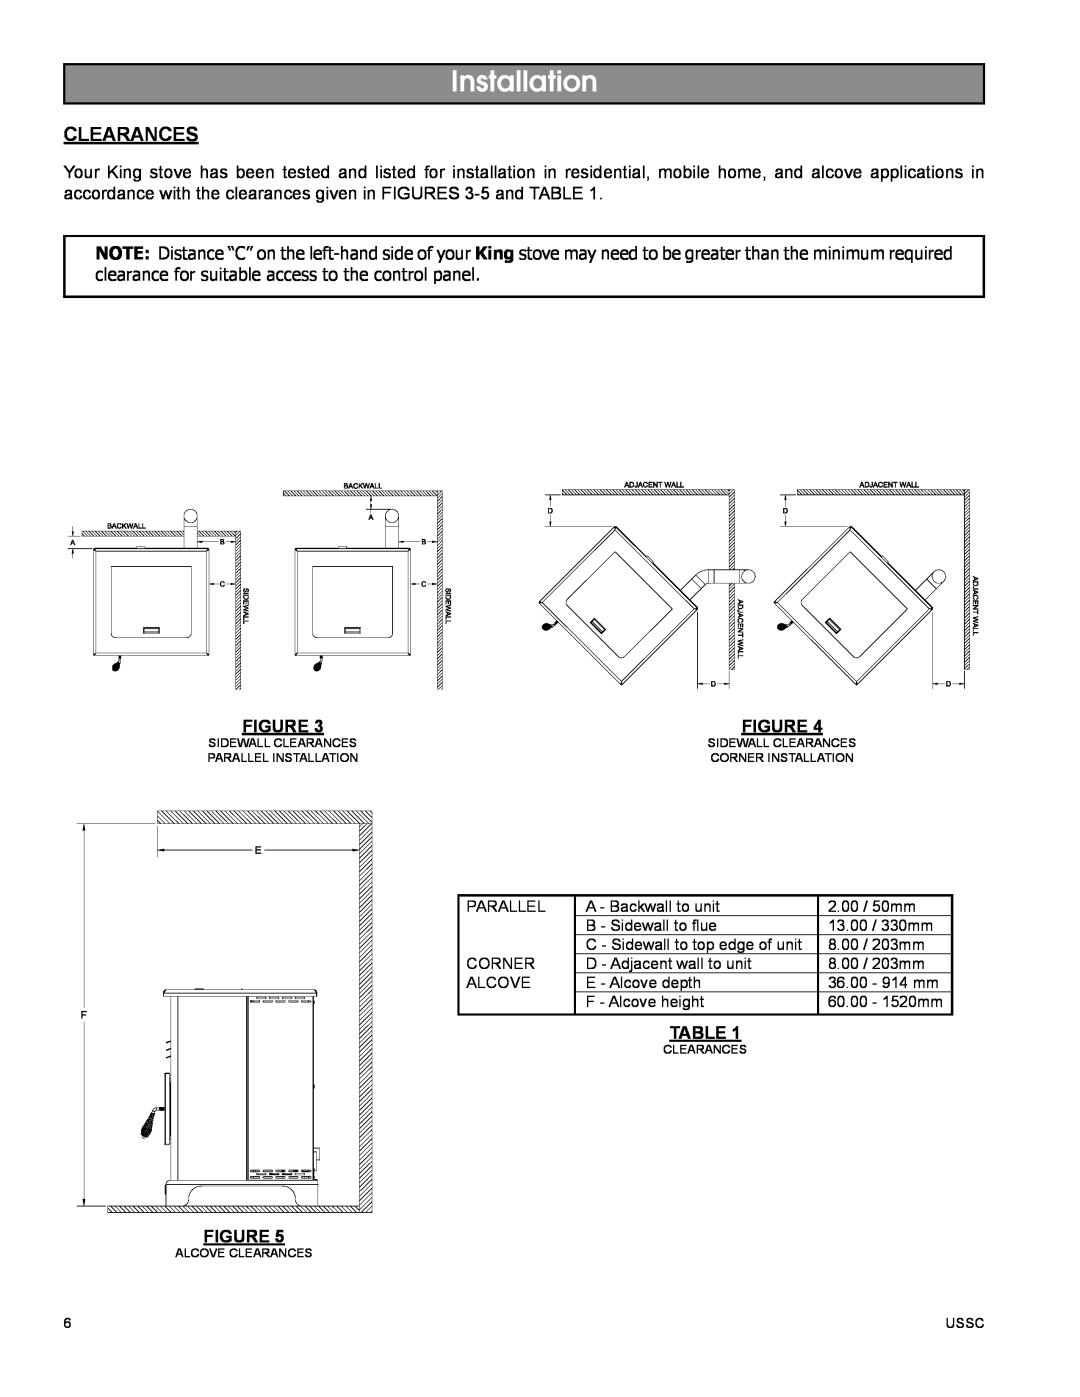 United States Stove 5510 owner manual Installation, Clearances 